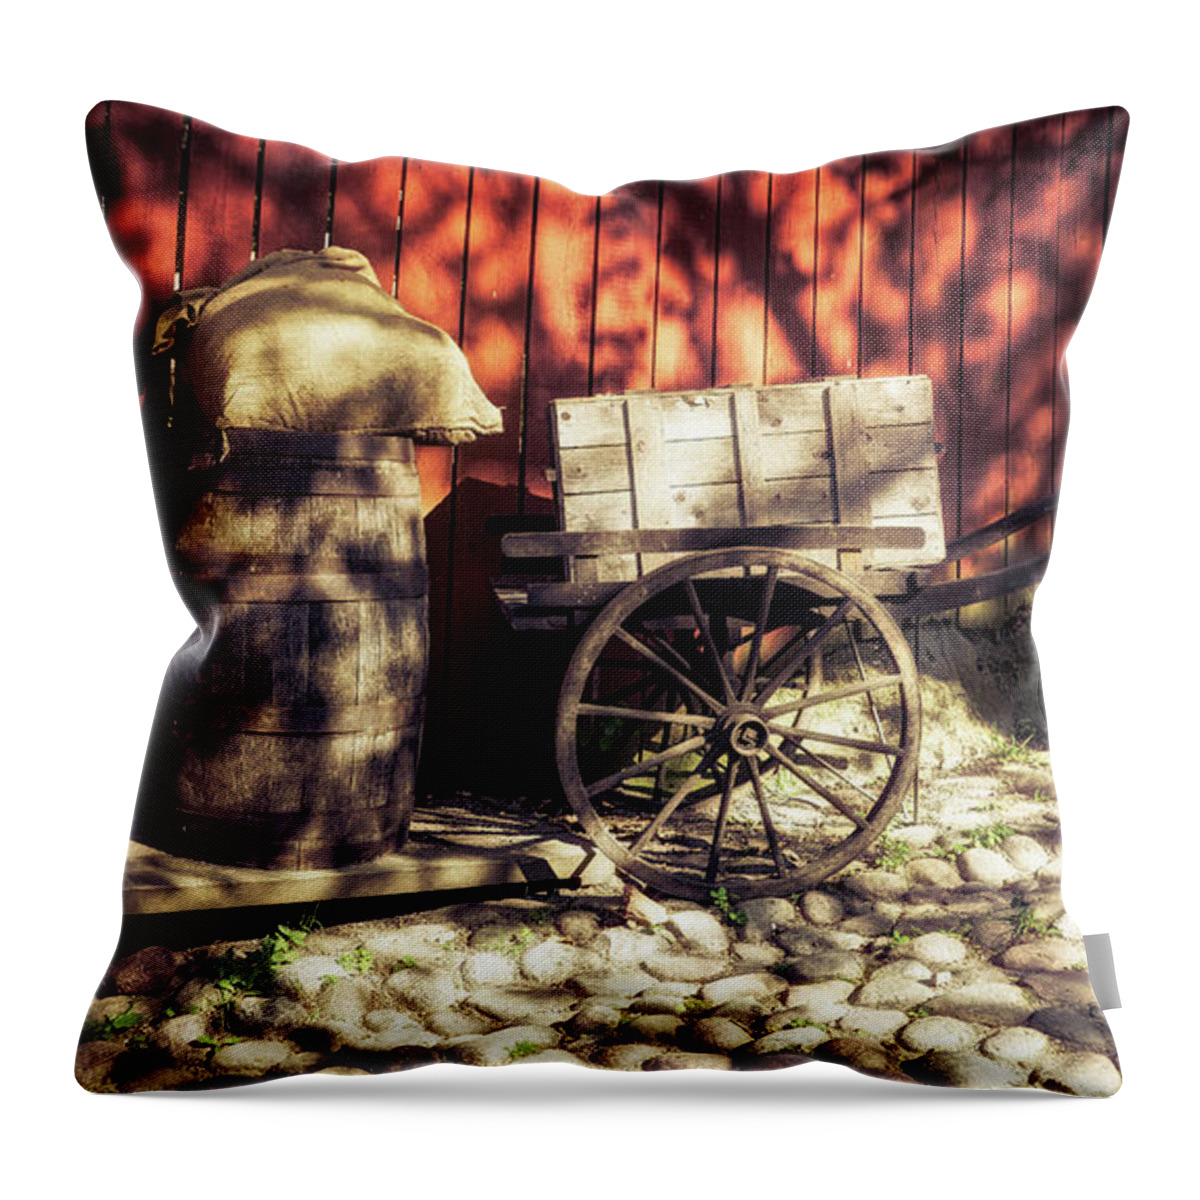 Barrel Throw Pillow featuring the photograph Barrel and Cart by James Billings